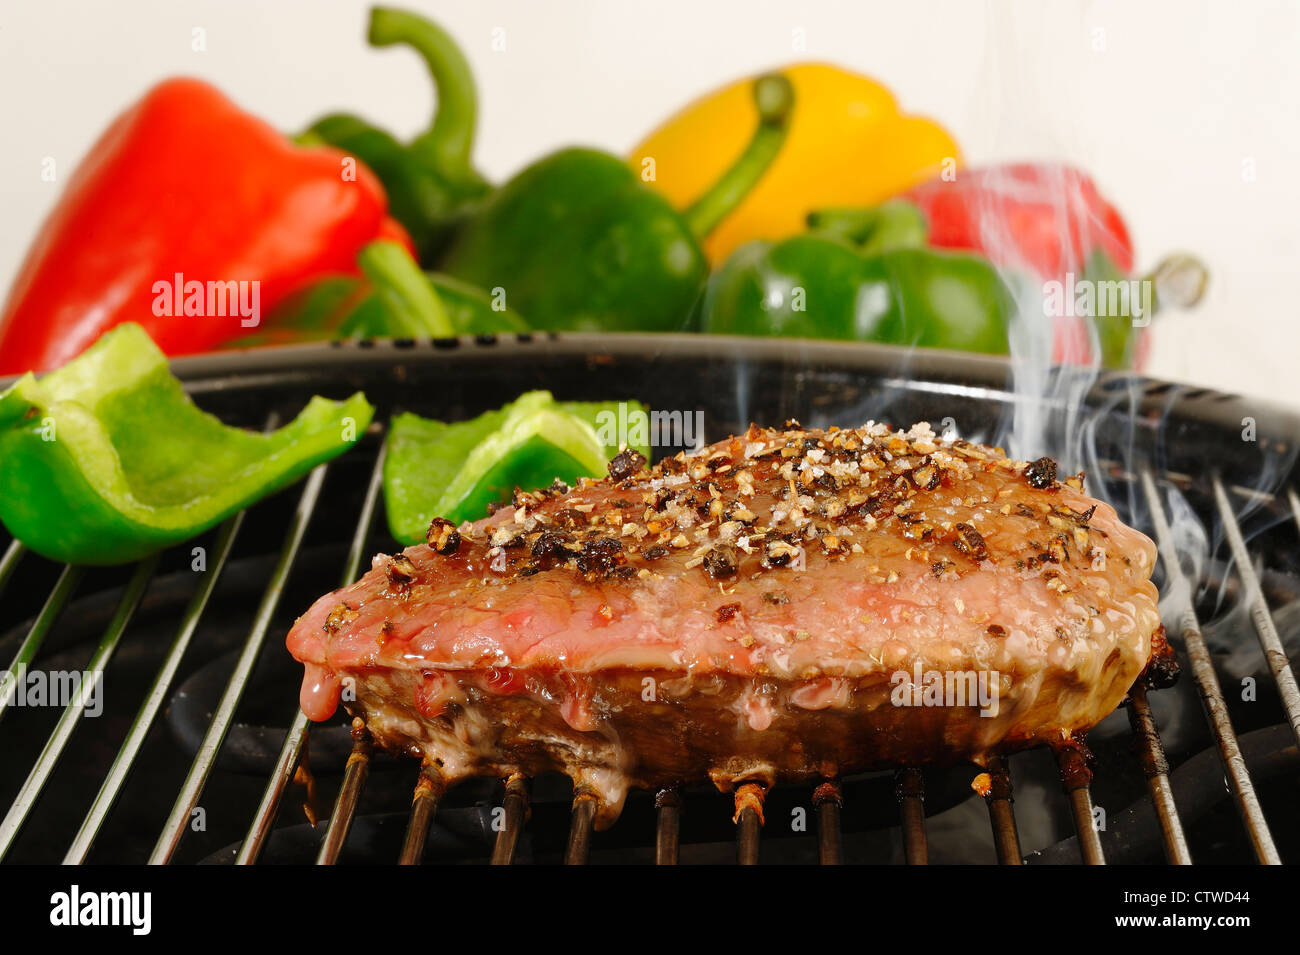 Grill Steak On An Electric Stove Stock Photo Alamy